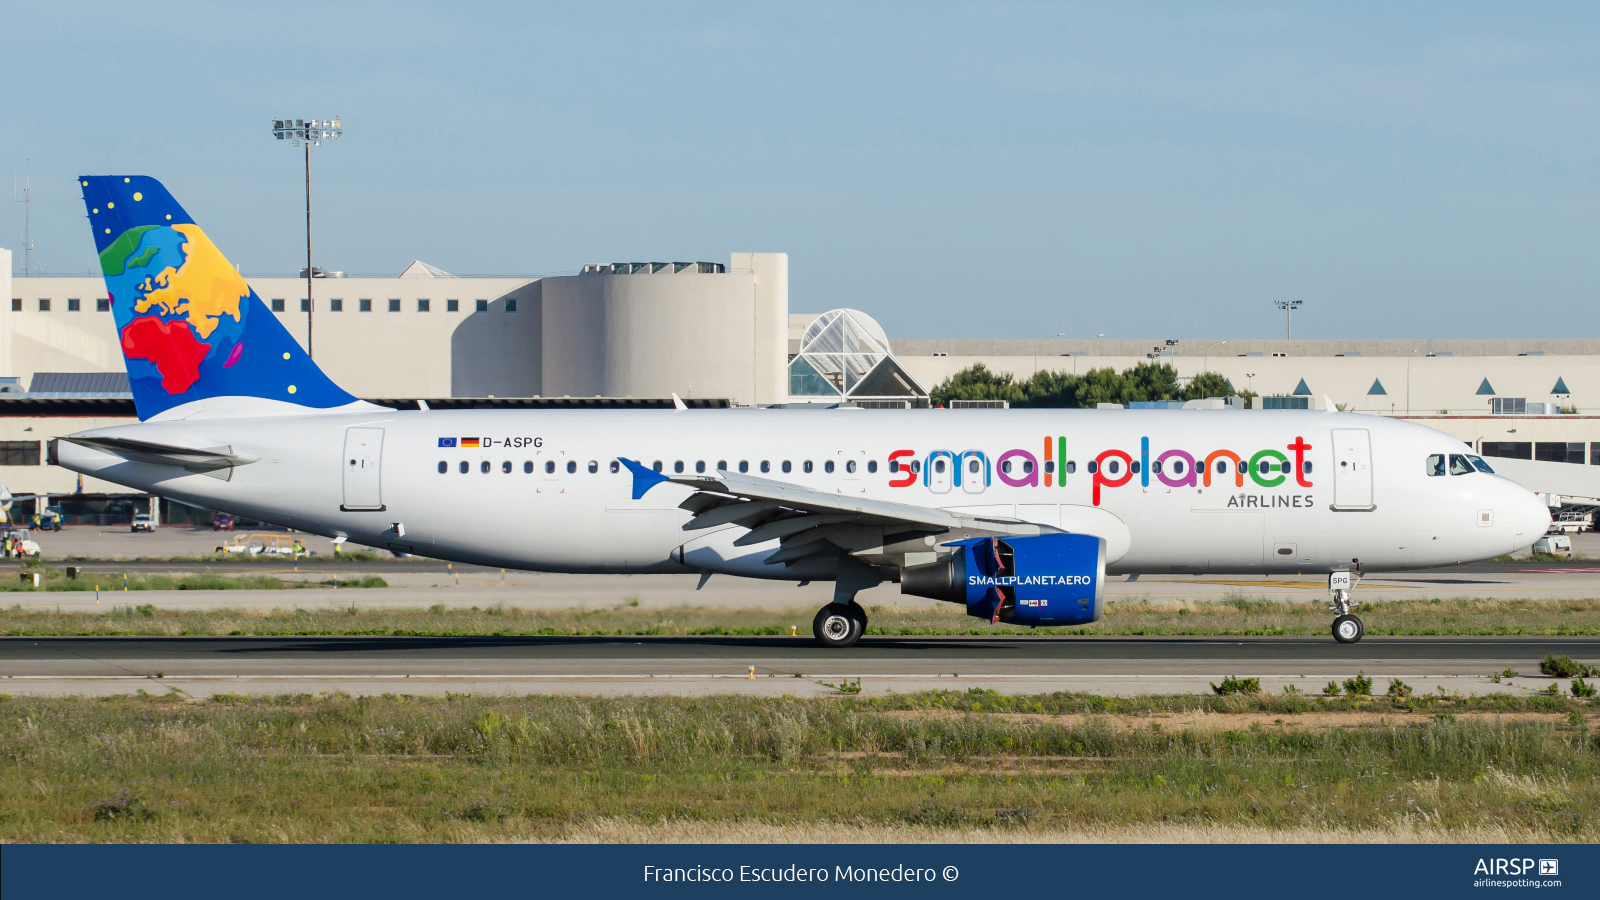 Small Planet Airlines  Airbus A320  D-ASPG